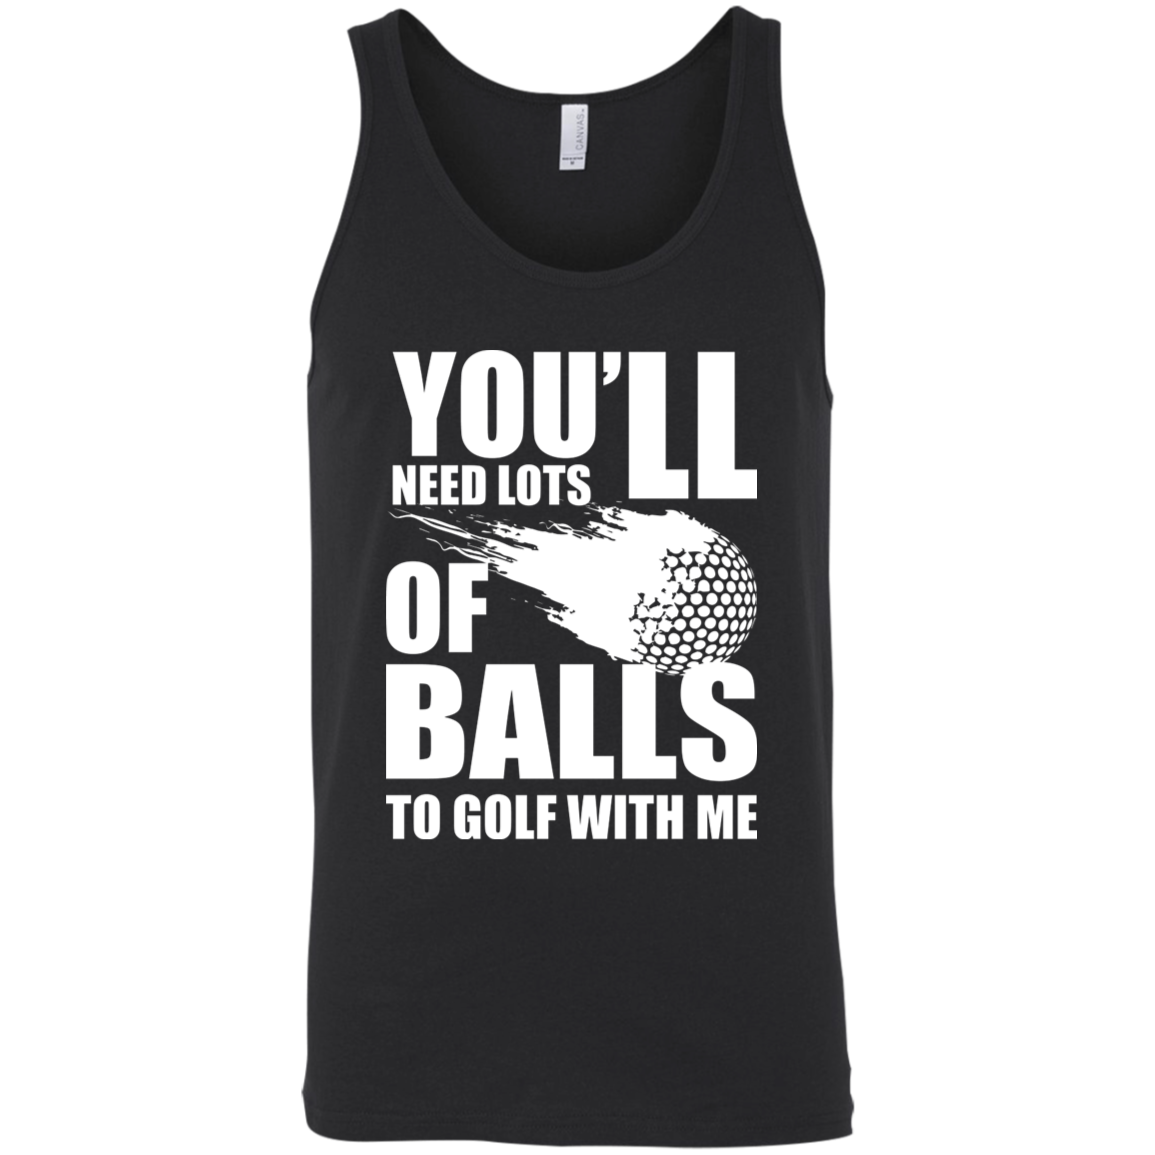 You'll Need Lots Of Balls To Golf With Me Tank Top Apparel - The Beer Lodge